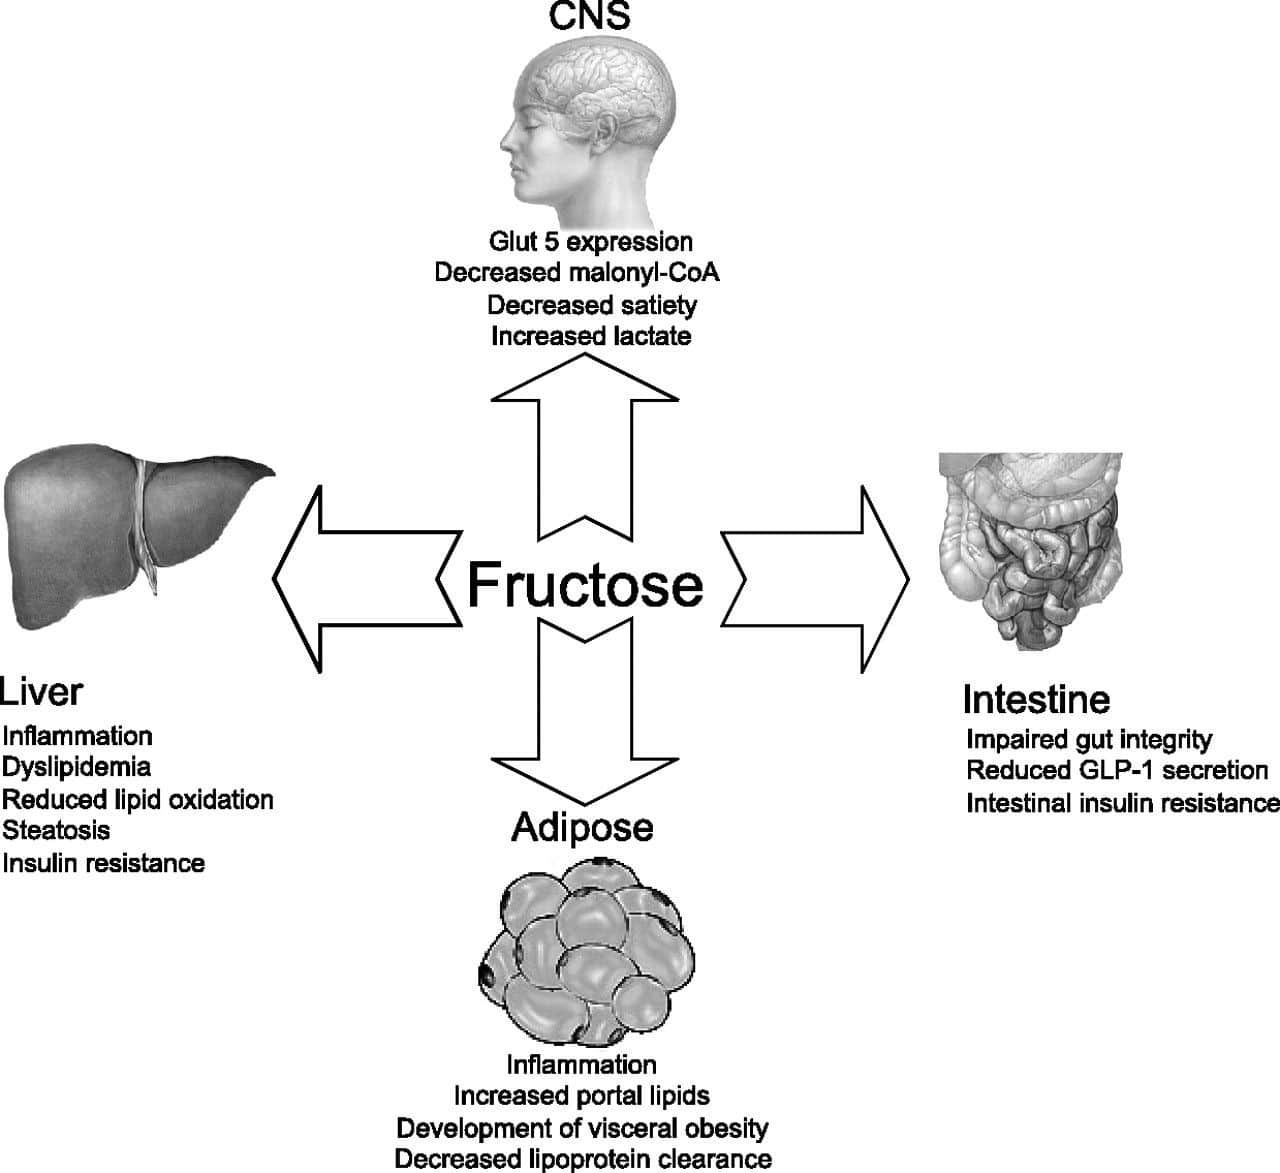 Death By Fructose: The Toxin to Avoid and Reasons Why